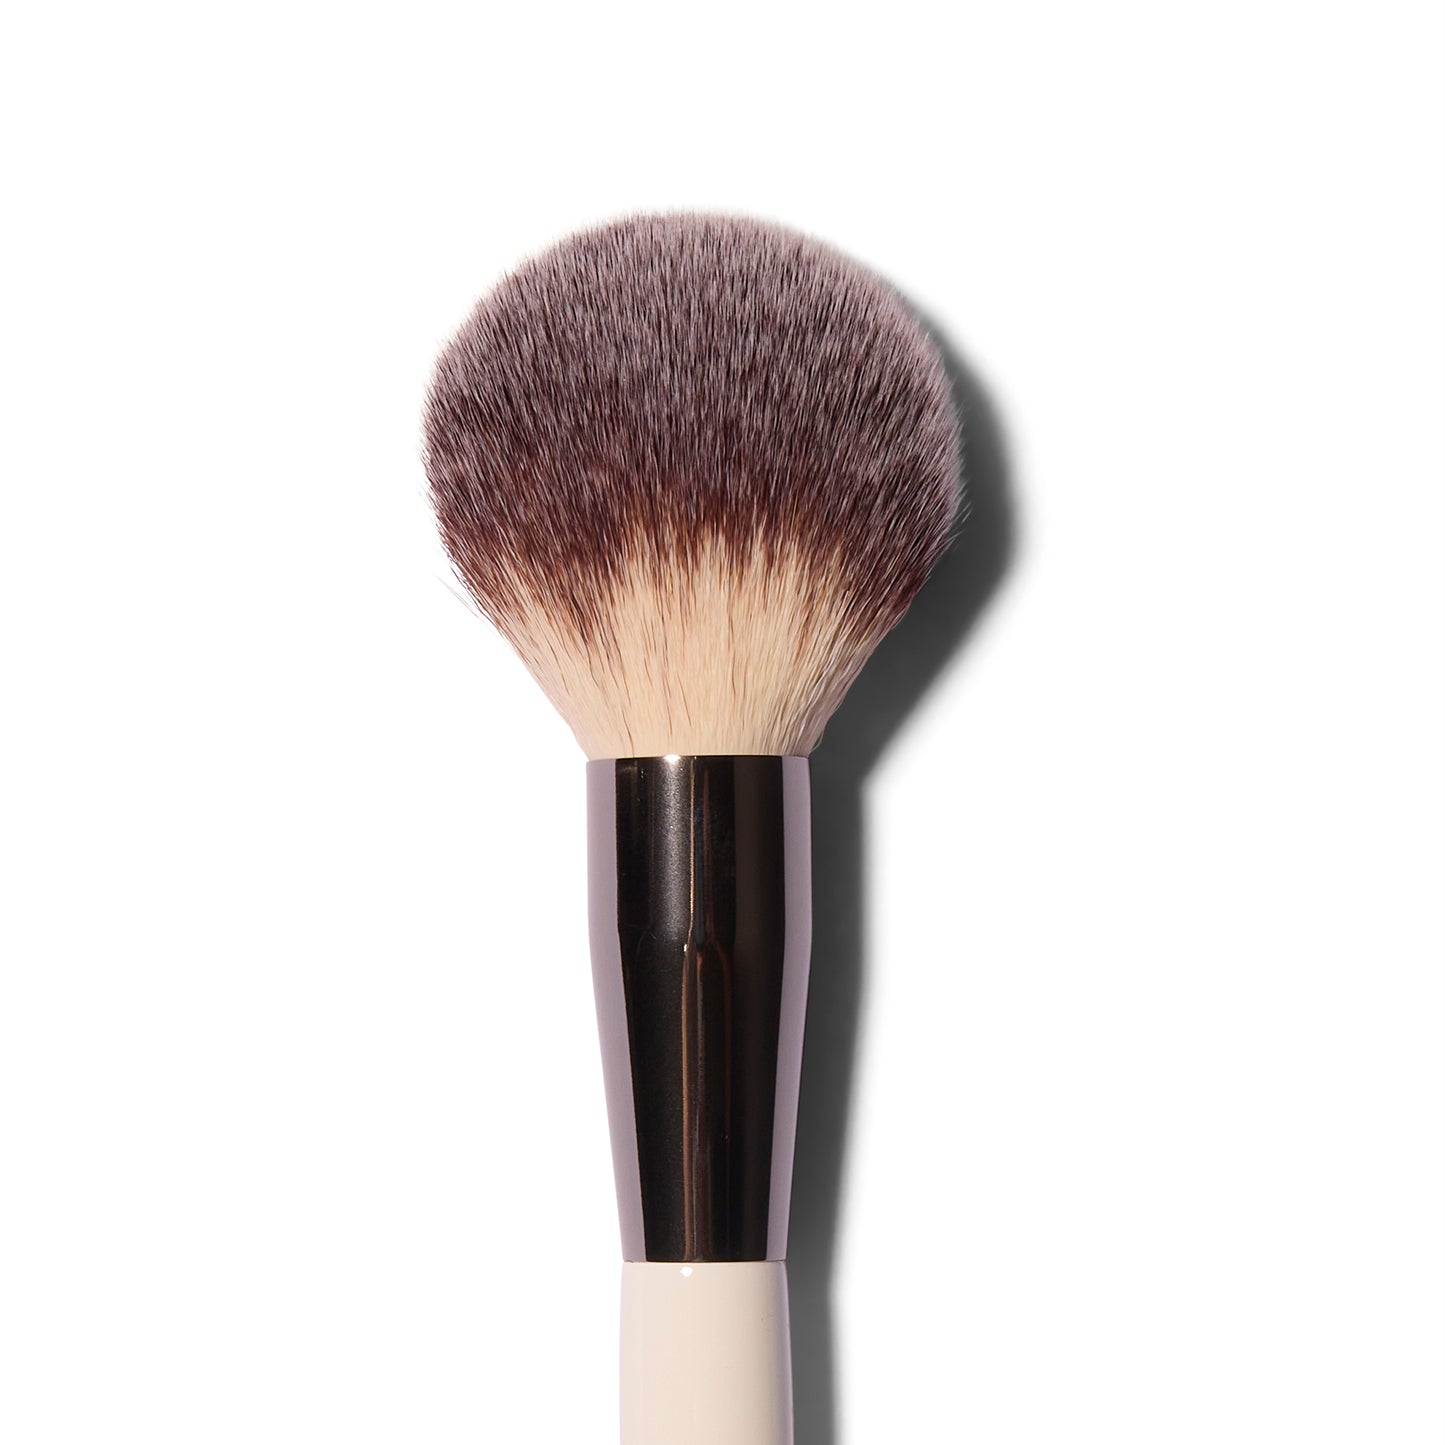 Close up view of the large, fluffy Roen Everything Powder synthetic powder brush with a domed shape.